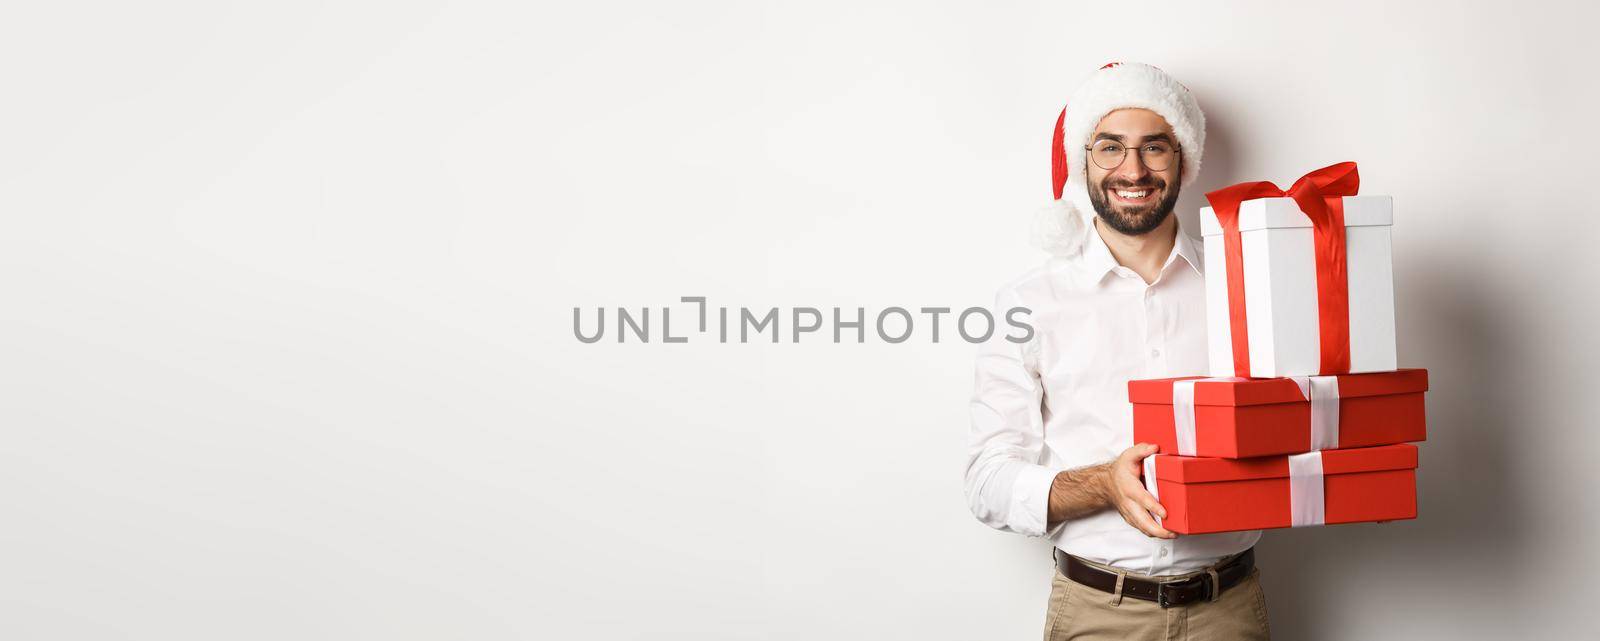 Merry christmas, holidays concept. Happy young man smiling, holding gifts in boxes and wearing santa hat, white background.